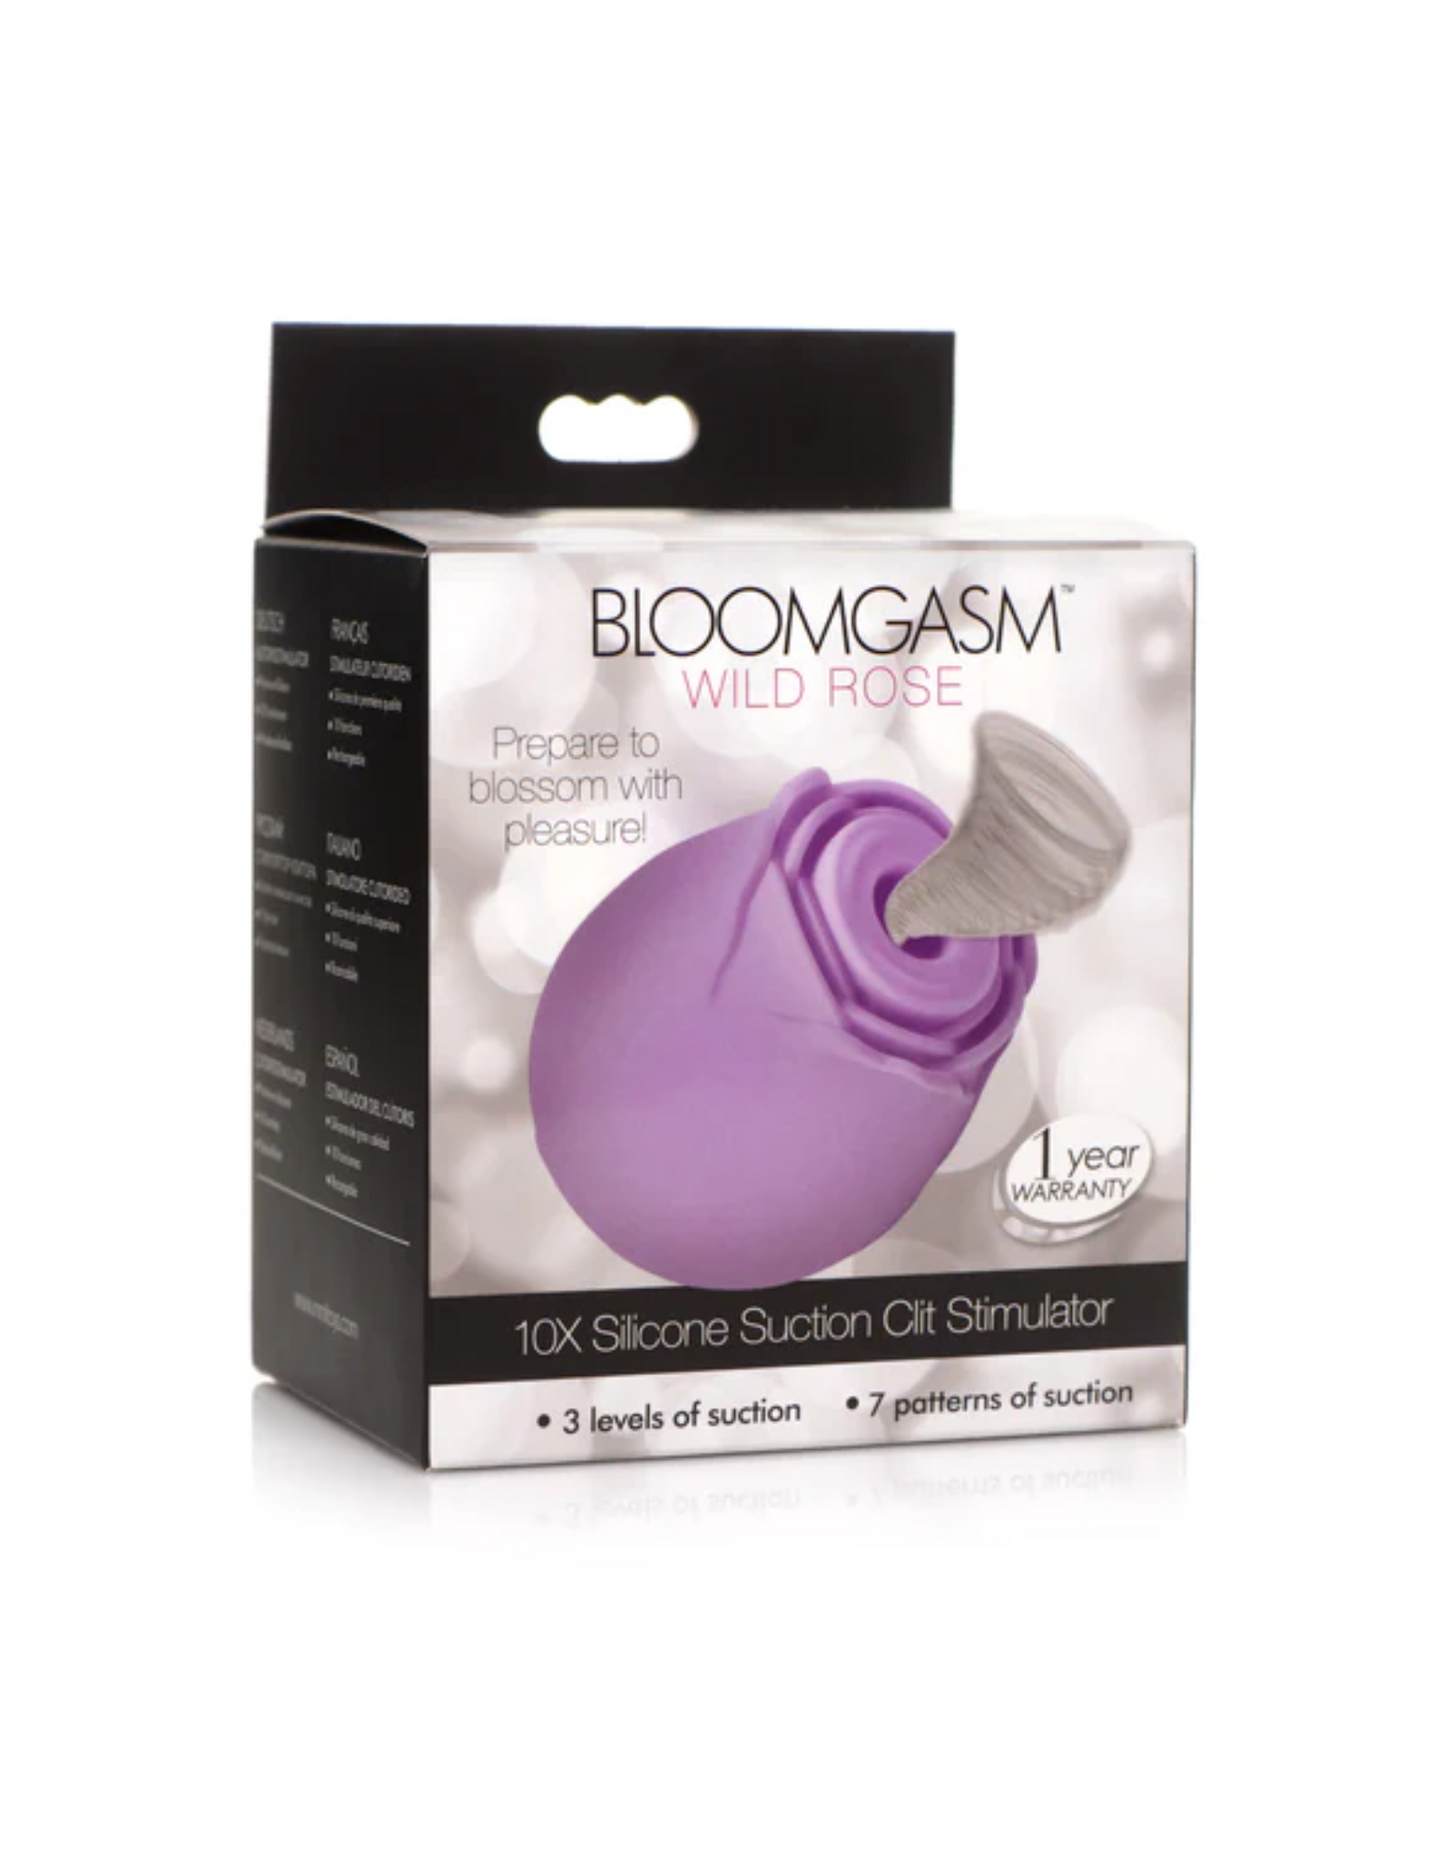 Bloomgasm Wild Rose 10X Silicone Suction Clit Stimulator (purple) in package.